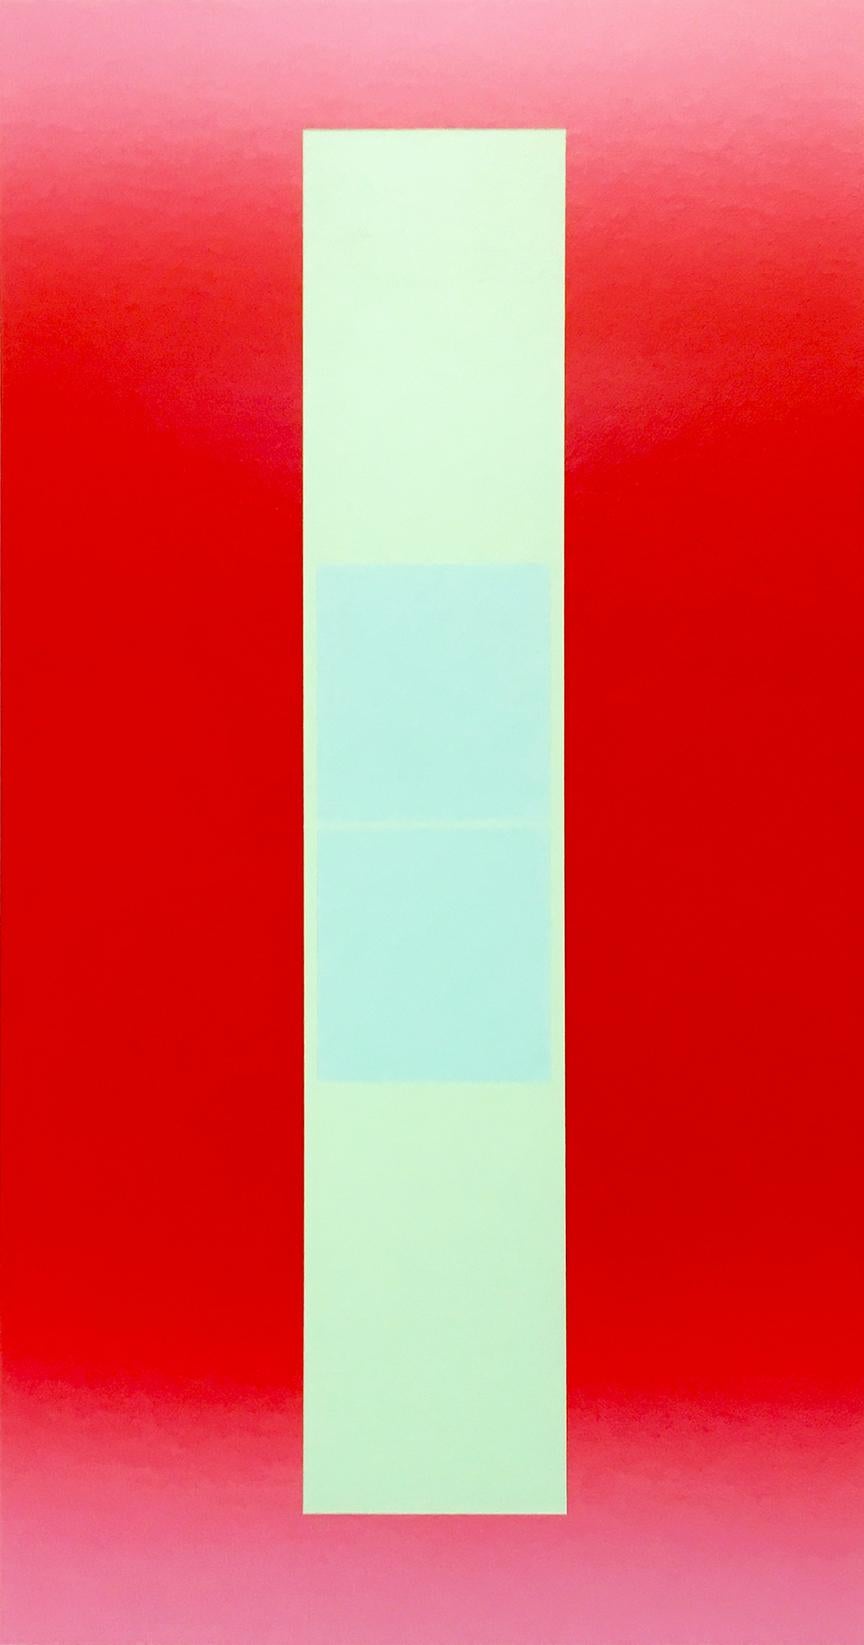 Minimalist Abstract Color-field Red painting on Paper – Untitled, 2019 WR201